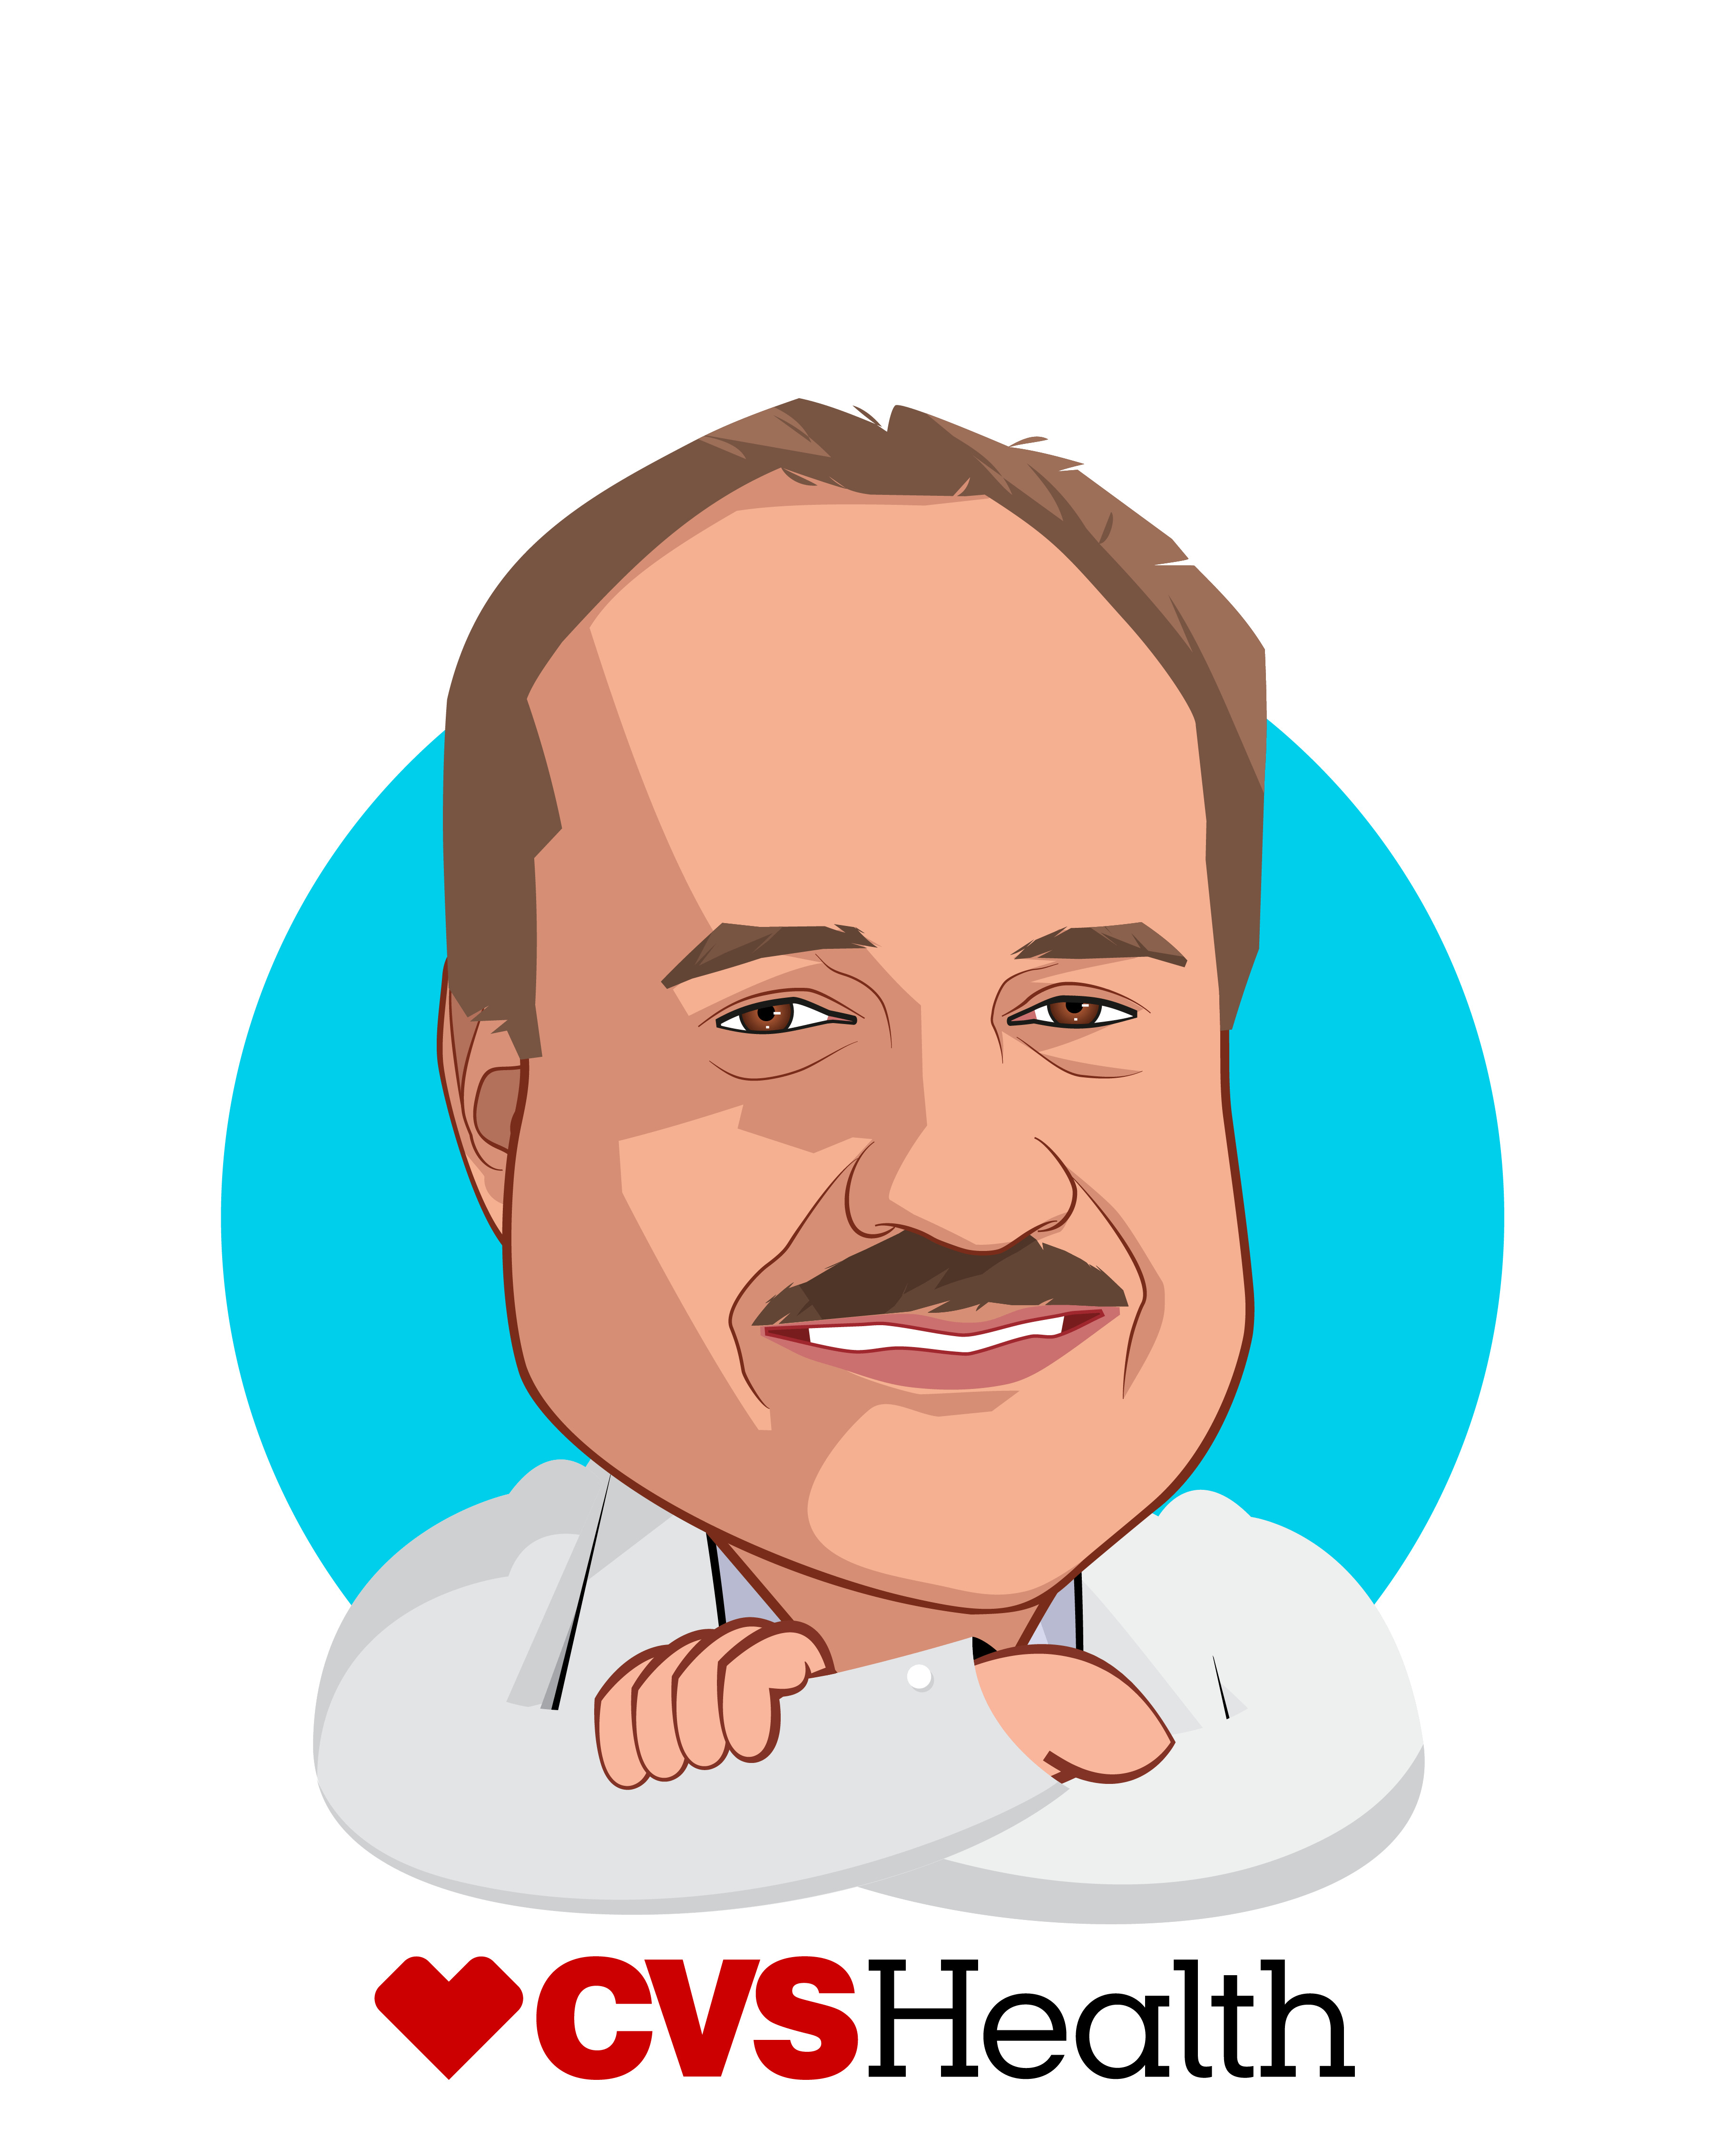 Overlay caricature of Larry Merlo, who is speaking at HLTH and is President and Chief Executive Officer at CVS Health